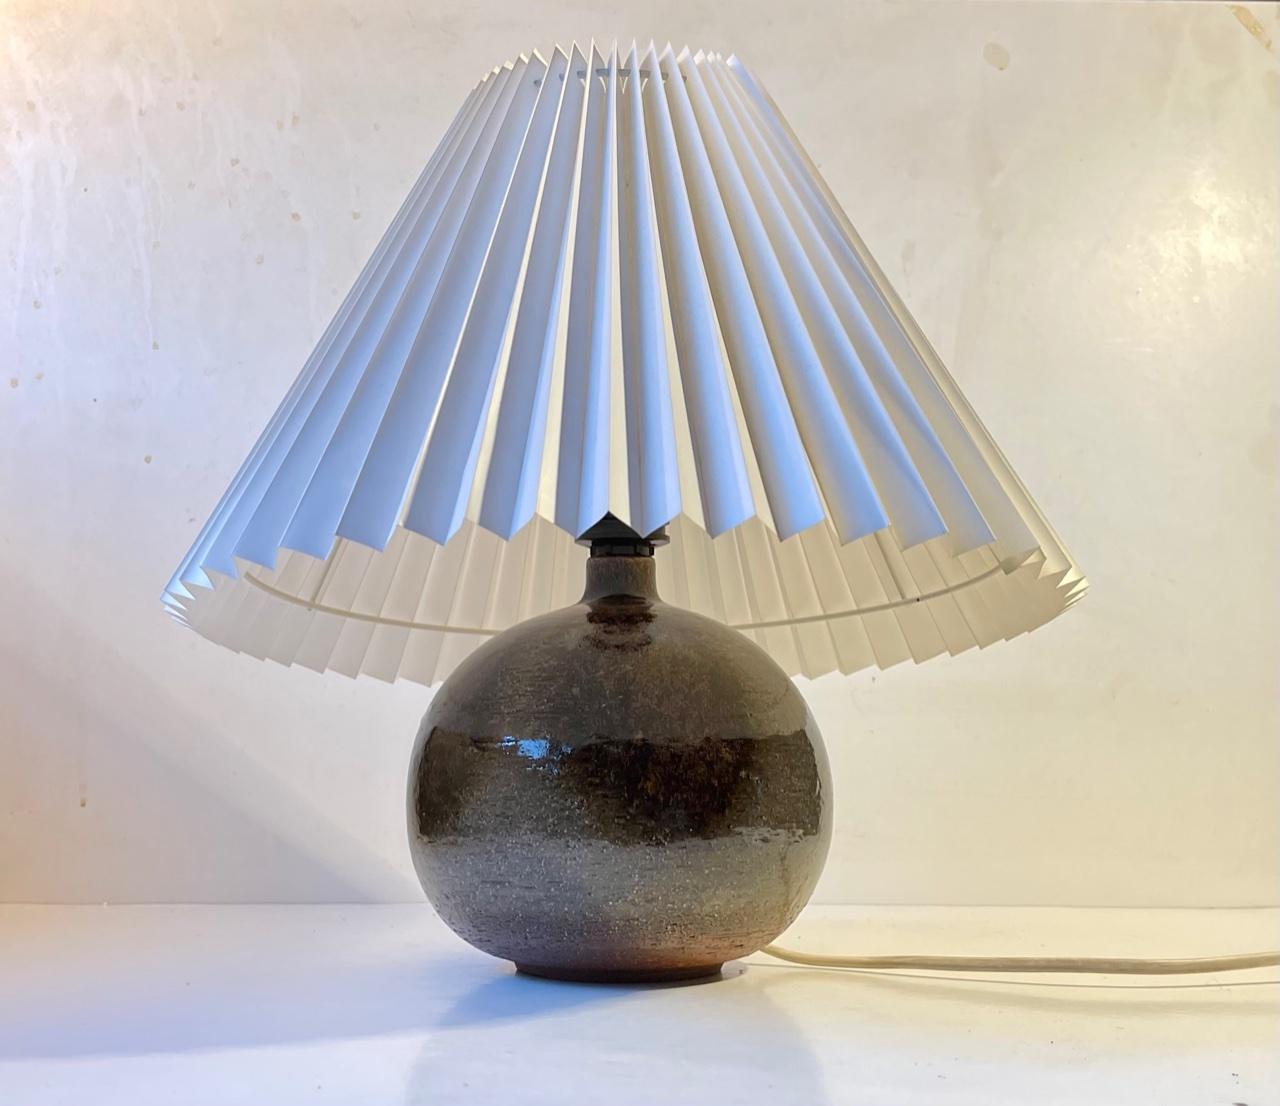 Spherical ceramic table light decorated with earthy polychrome glazes. It was designed by Jette Hellerøe and manufactured by Axella in Denmark during the 1970s. The base is signed by the maker. The height of 30 cm is without shade. The base diameter